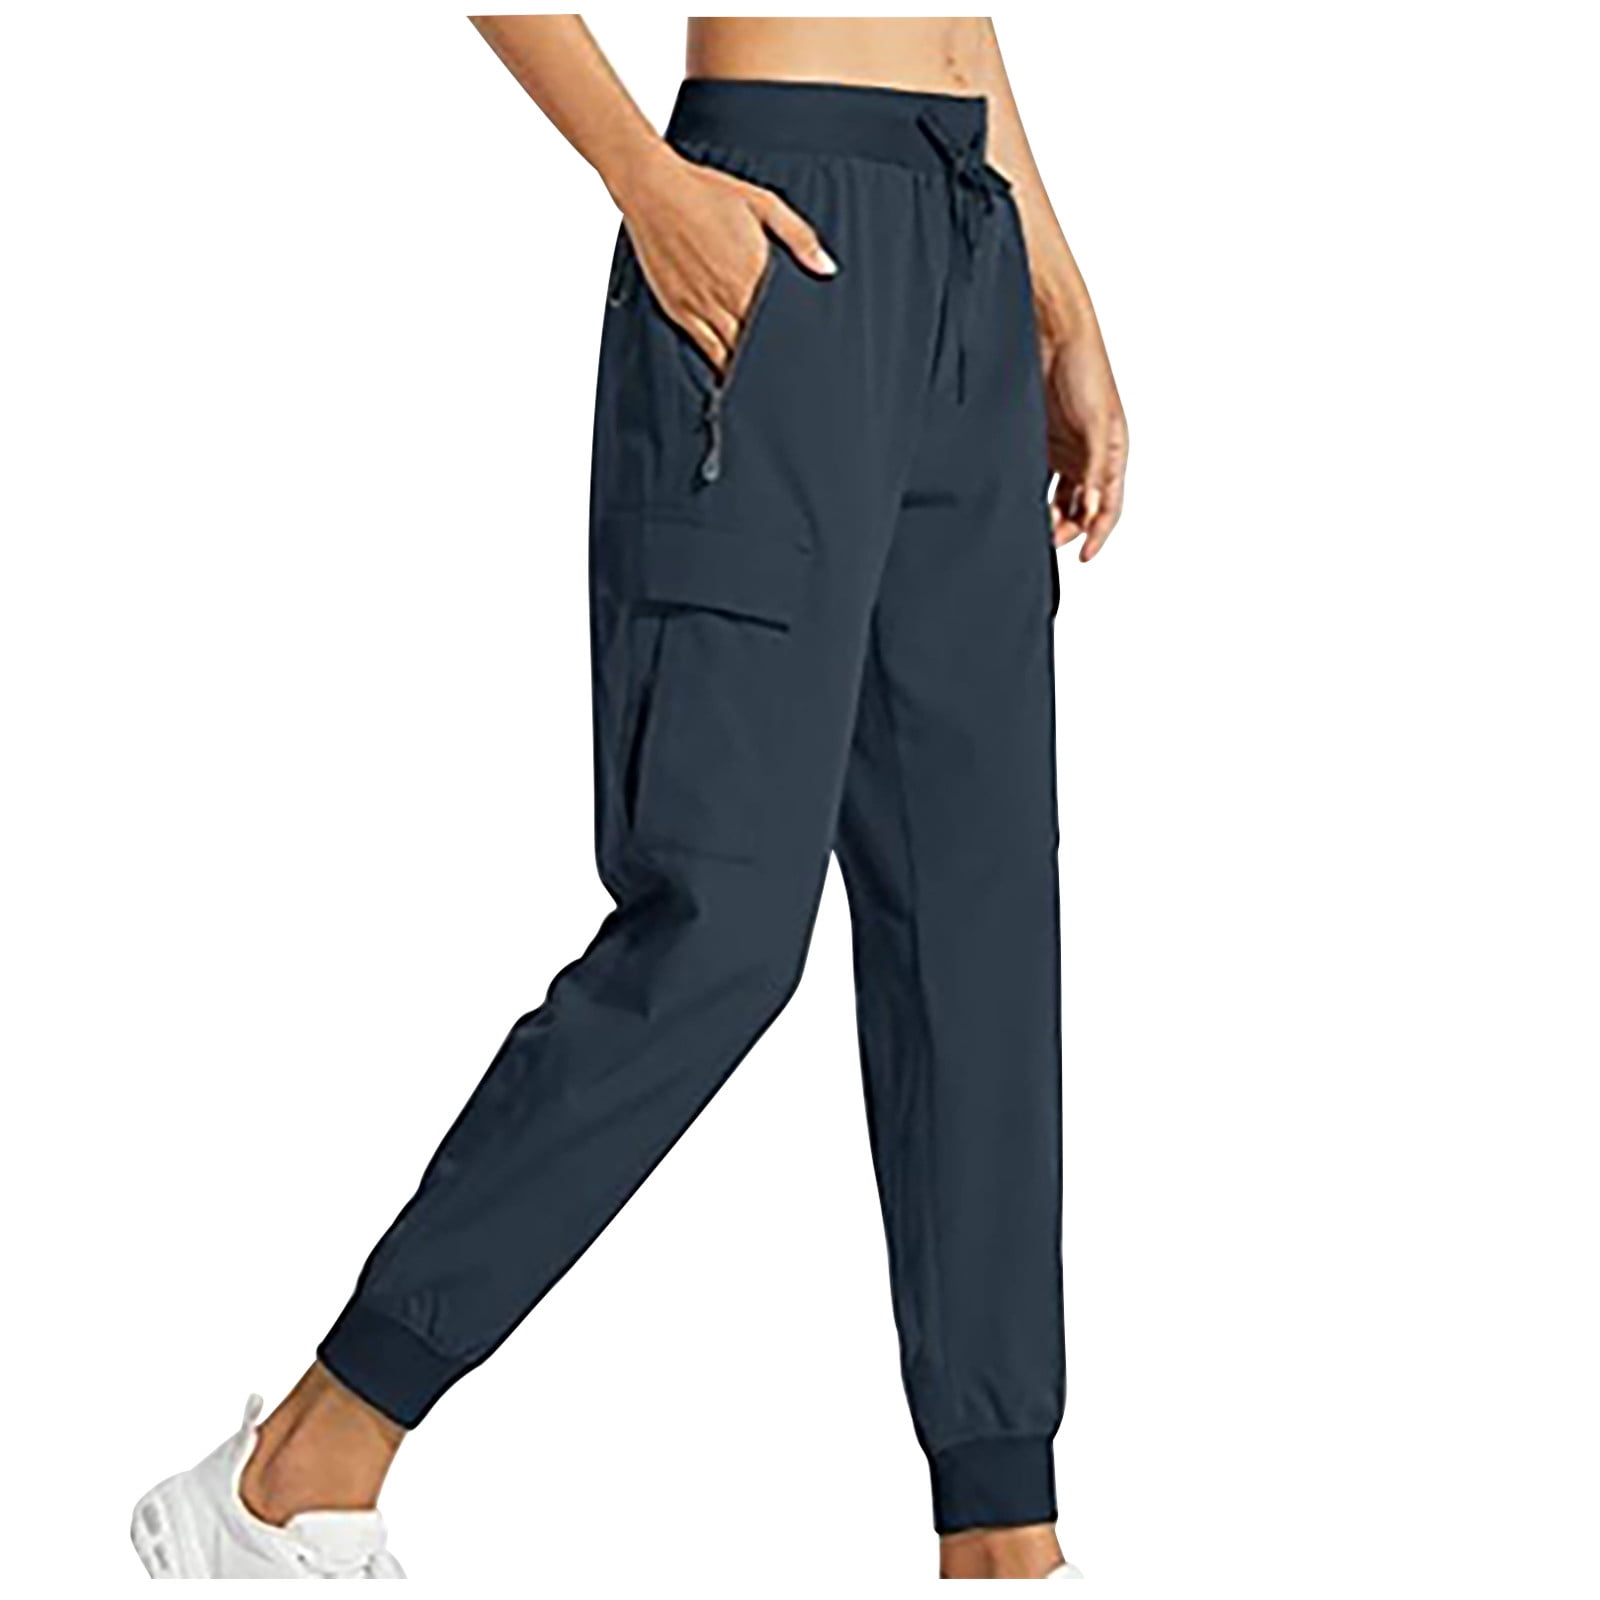 RYRJJ Women's Cargo Joggers Pant Lightweight Quick Dry Hiking Pants  Athletic Workout Lounge Casual Outdoor Track Sweatpants with Zipper  Pockets(Blue,L) 